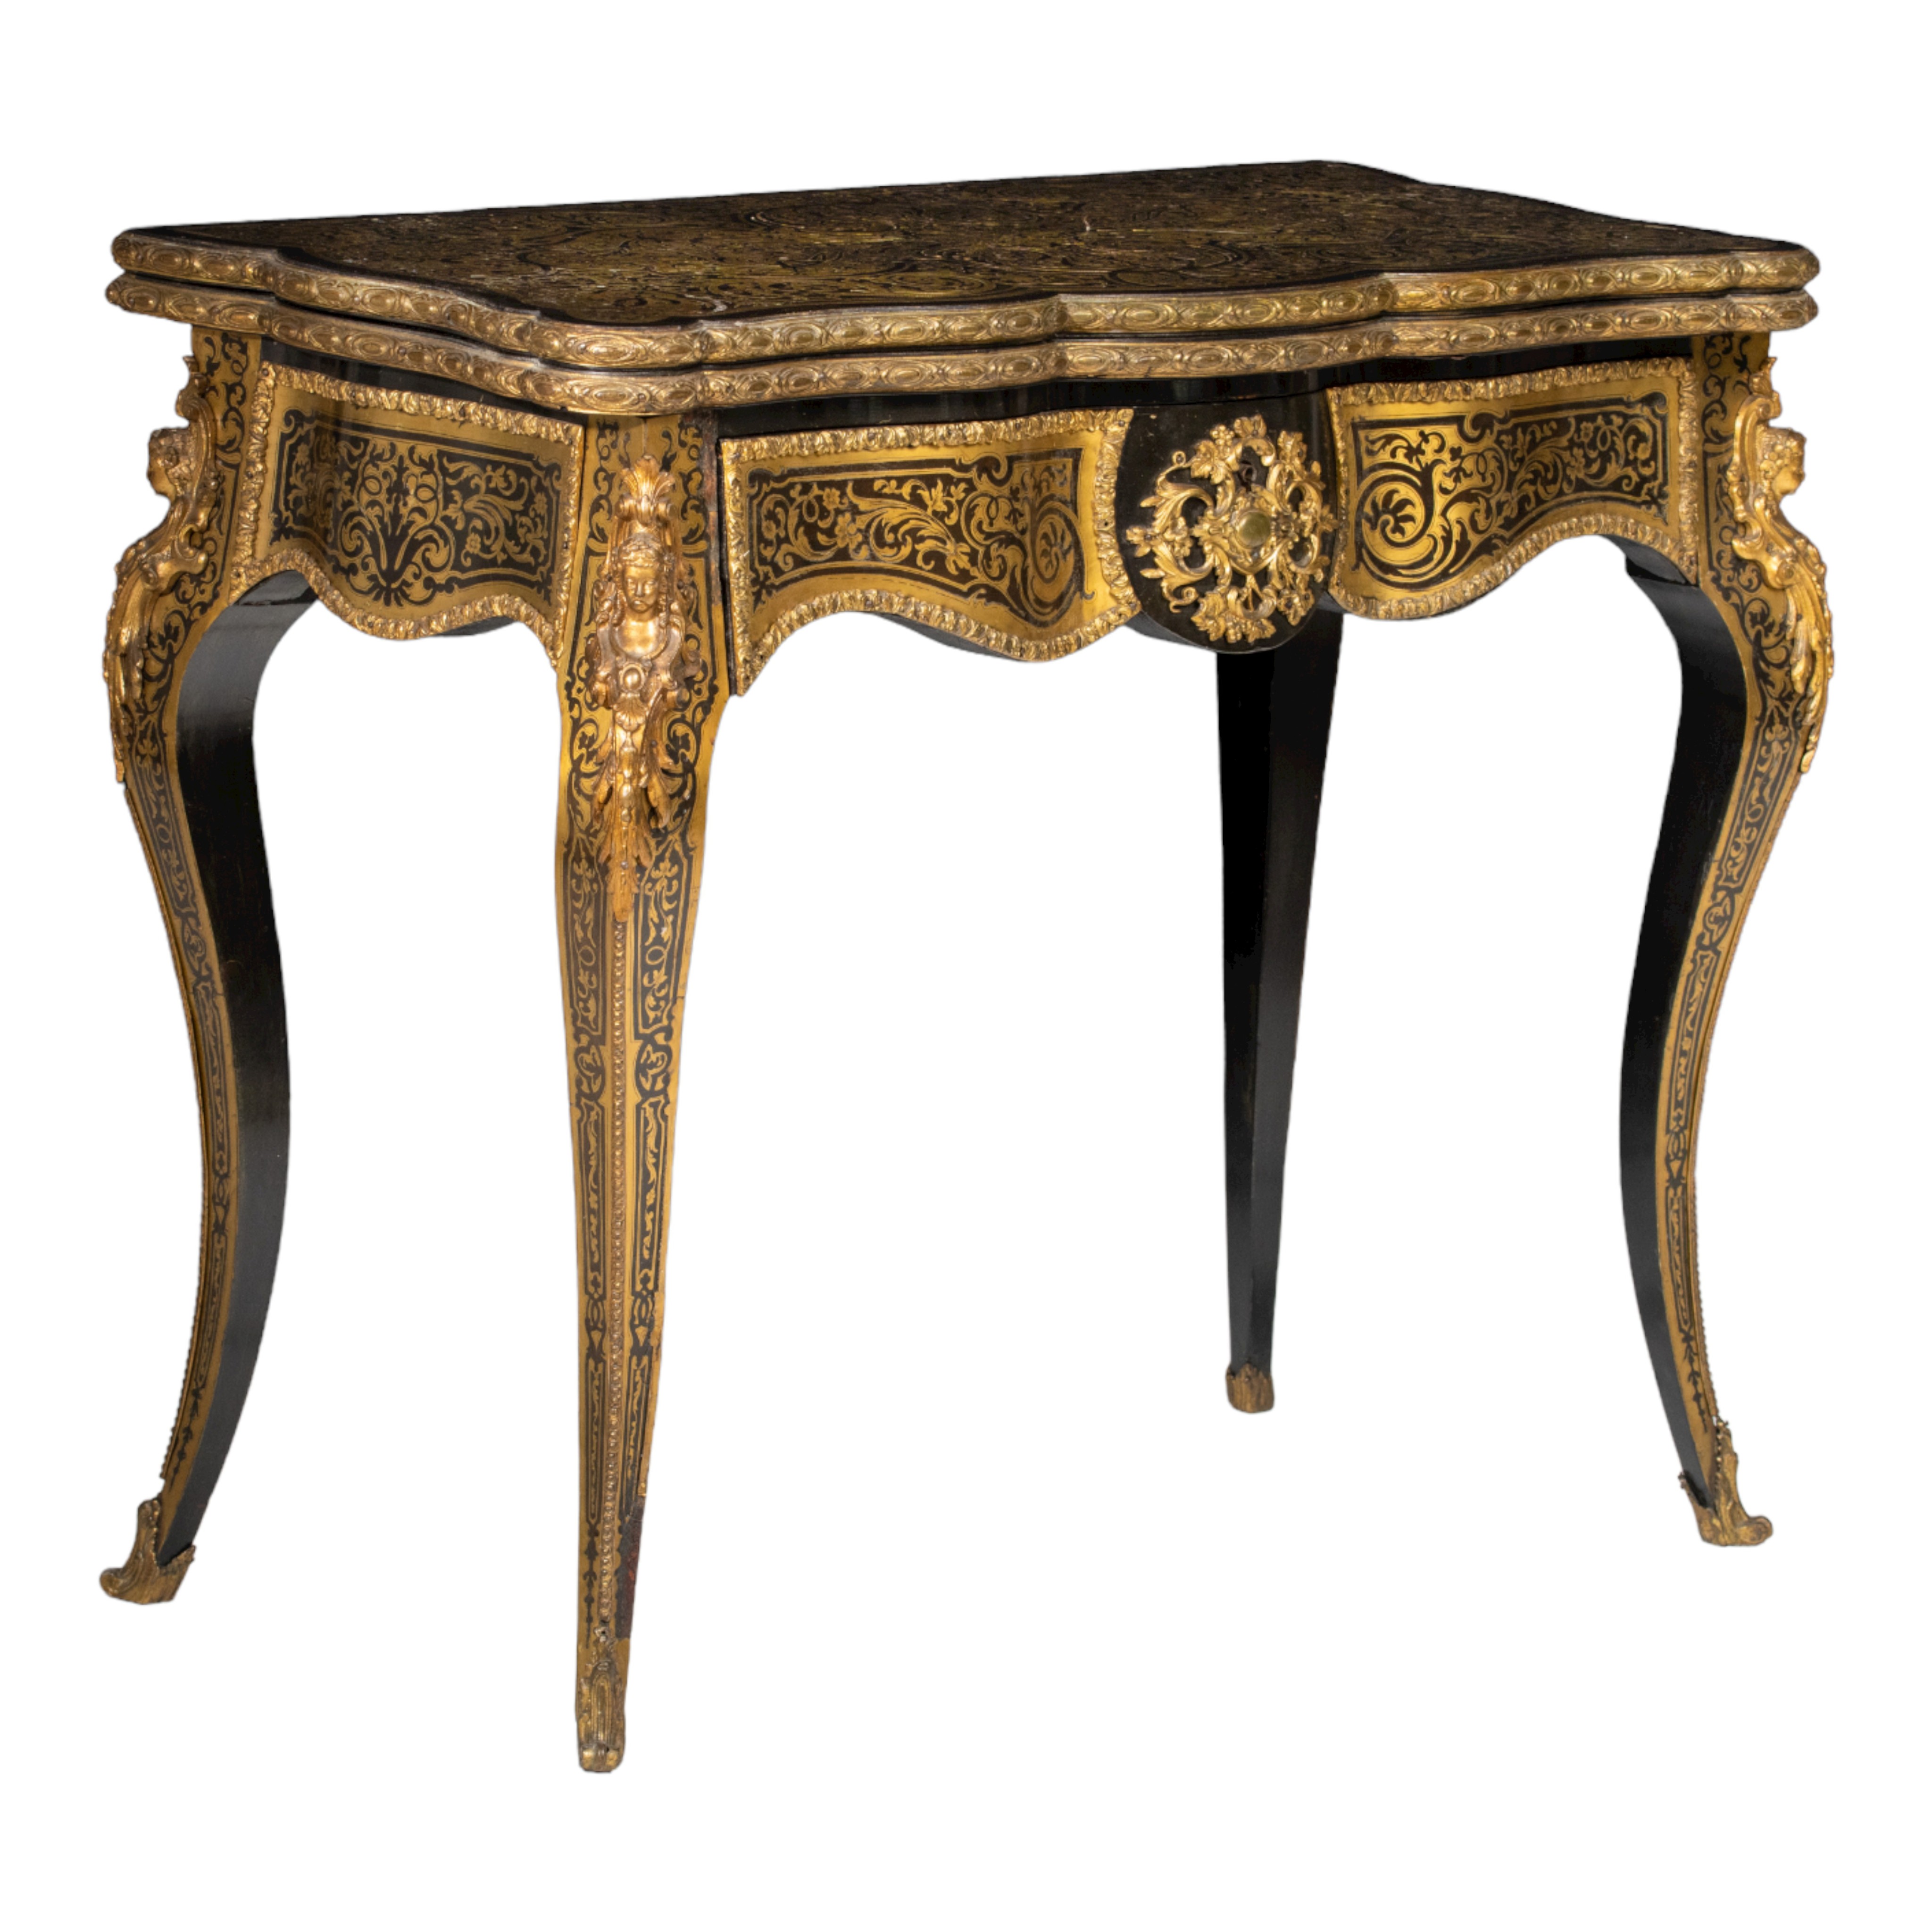 A fine Napoleon III Boulle playing card table, with gilt bronze mounts, H 73 - 75 - W 44 - 88 cm